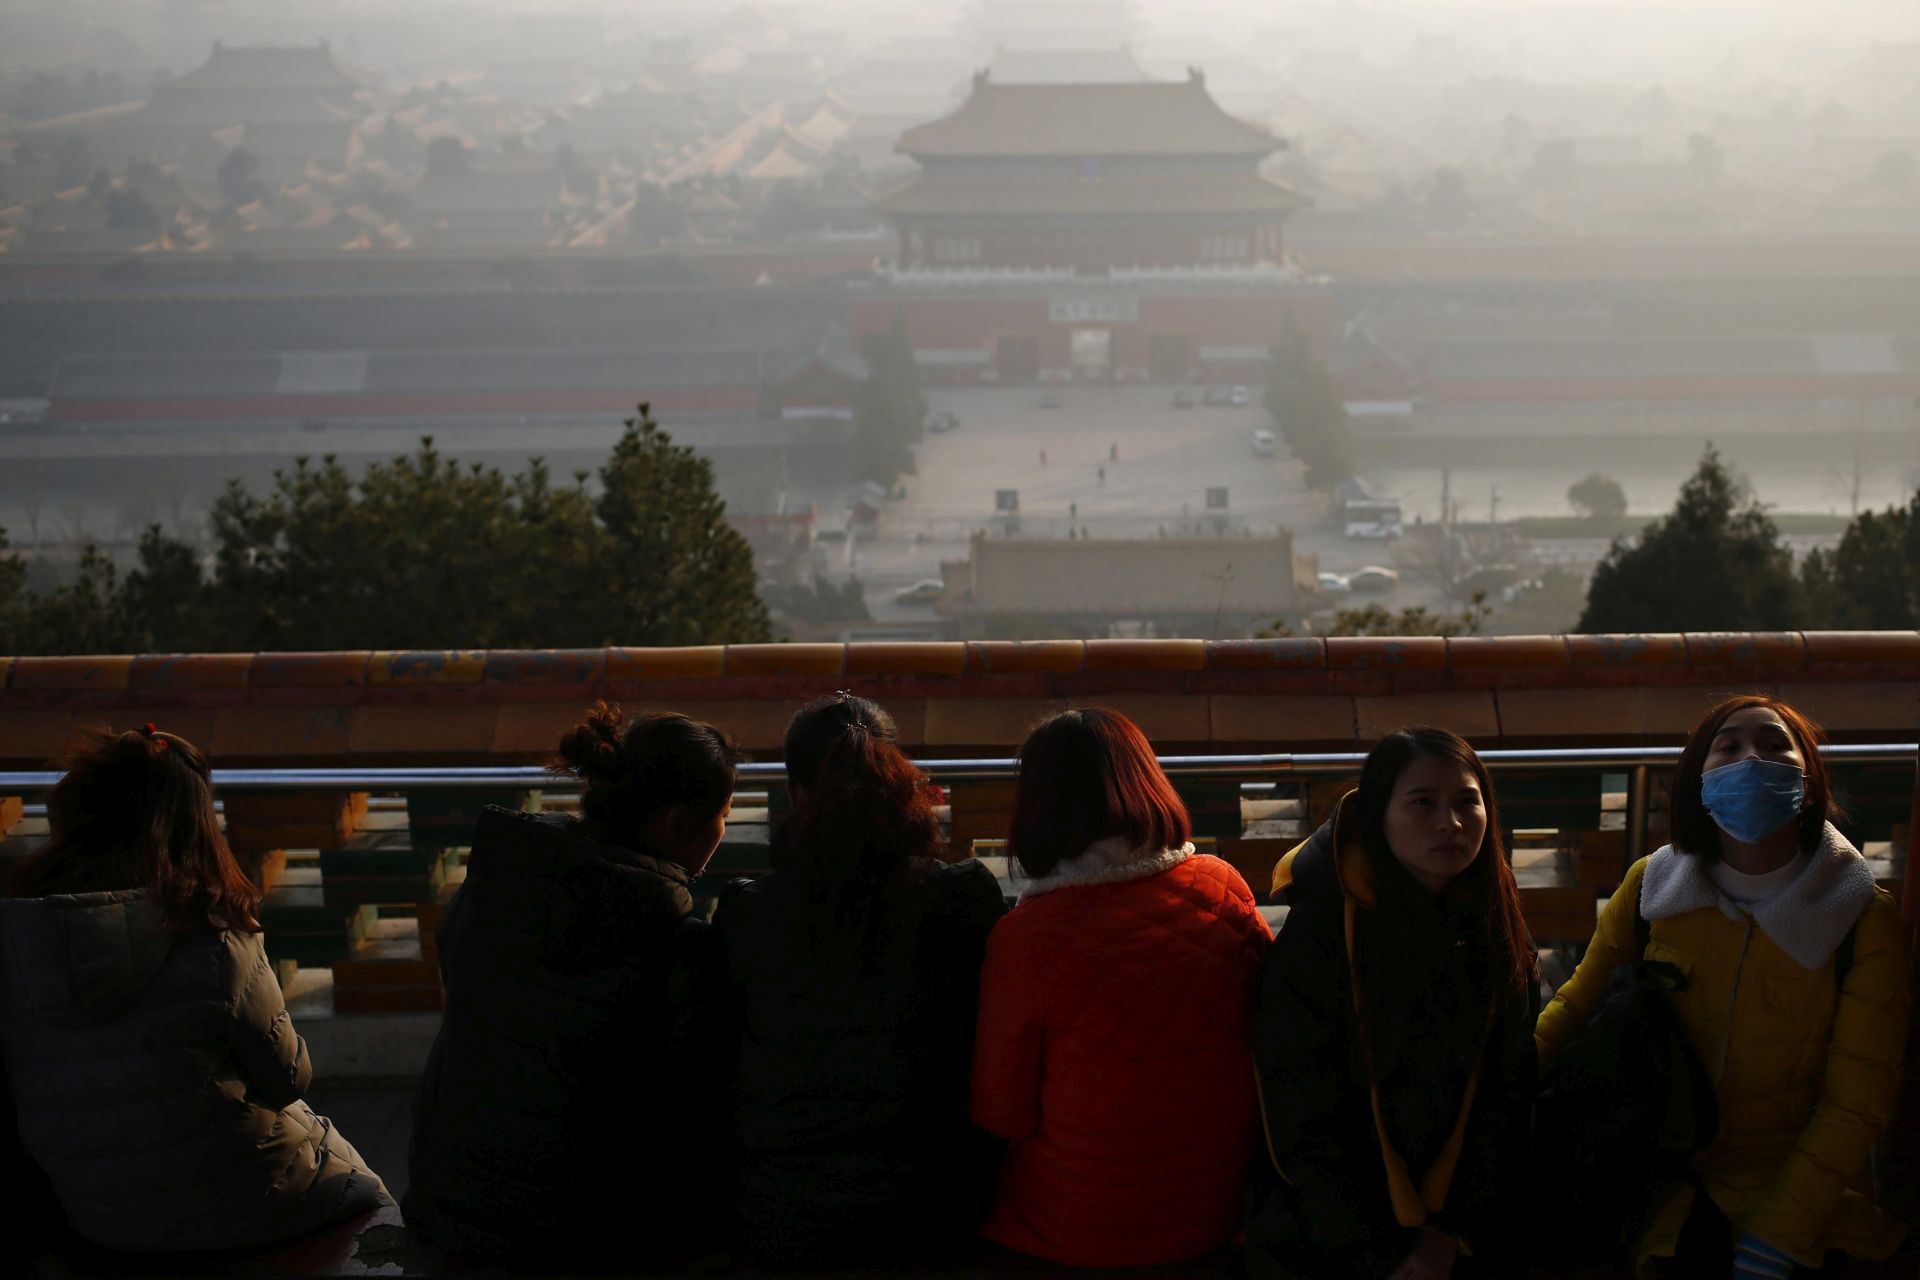 epa05682031 A woman wears mask at Jingshan Park while haze hangs over the Forbidden City in Beijing, China, 19 December 2016. Serious air pollution hit in China's nine provinces and cities, with haze hanging over an area of about 1.42 million square kilometers on 18 December. The air pollution alert lasts in many part of China that the heavy pollution is expected to persist over 11 provinces and cities on 19 December 2016.  EPA/WU HONG